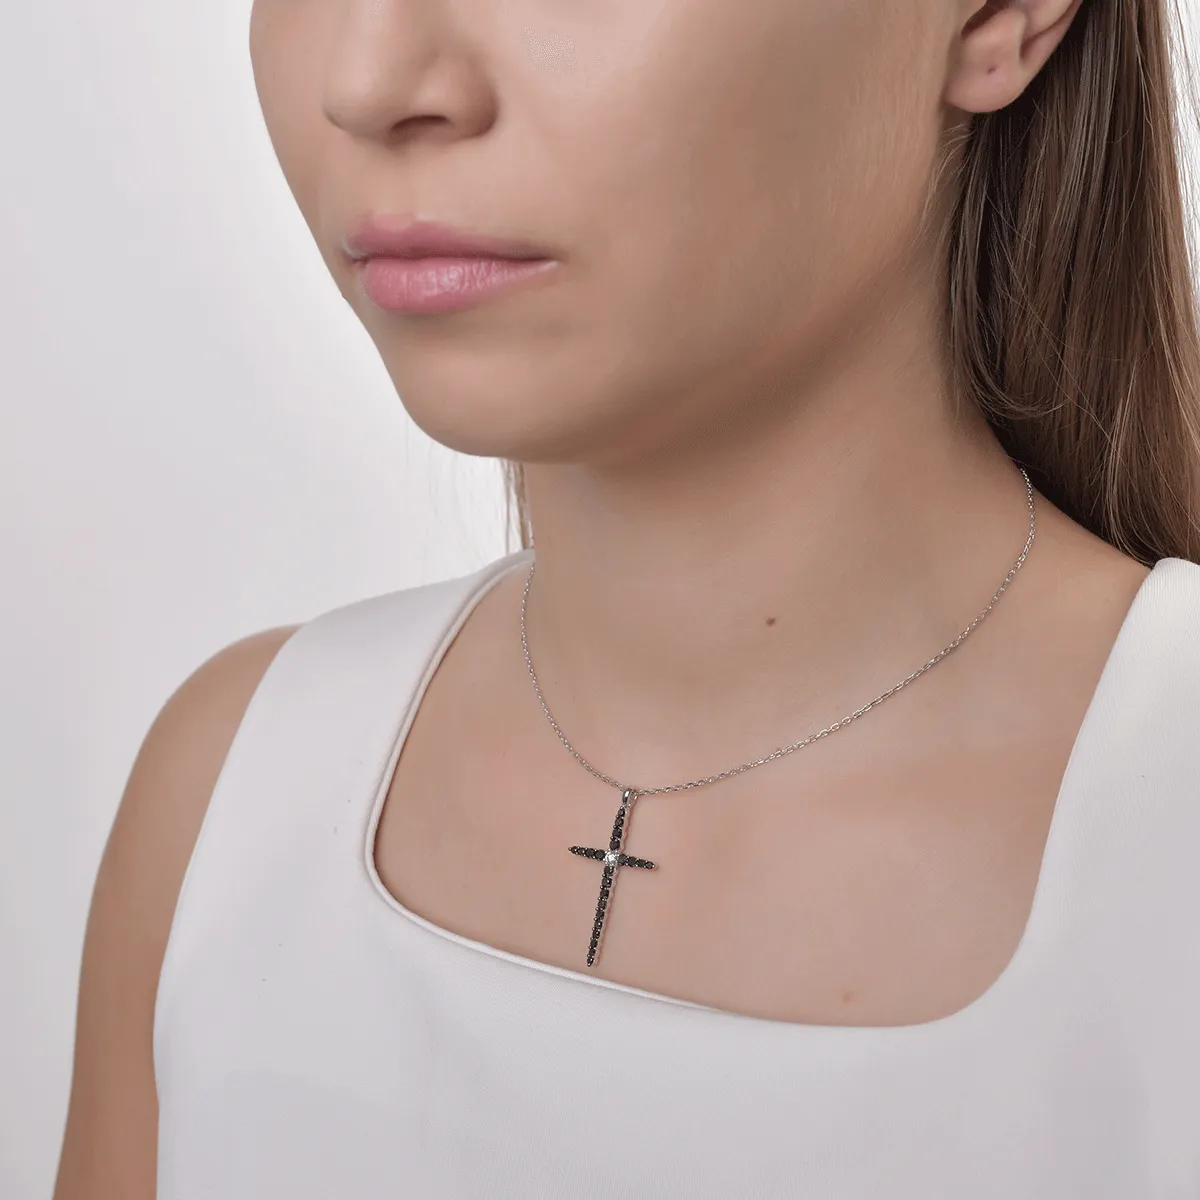 18K white gold cross pendant necklace with 1ct black diamonds and a 0.09ct clear diamond